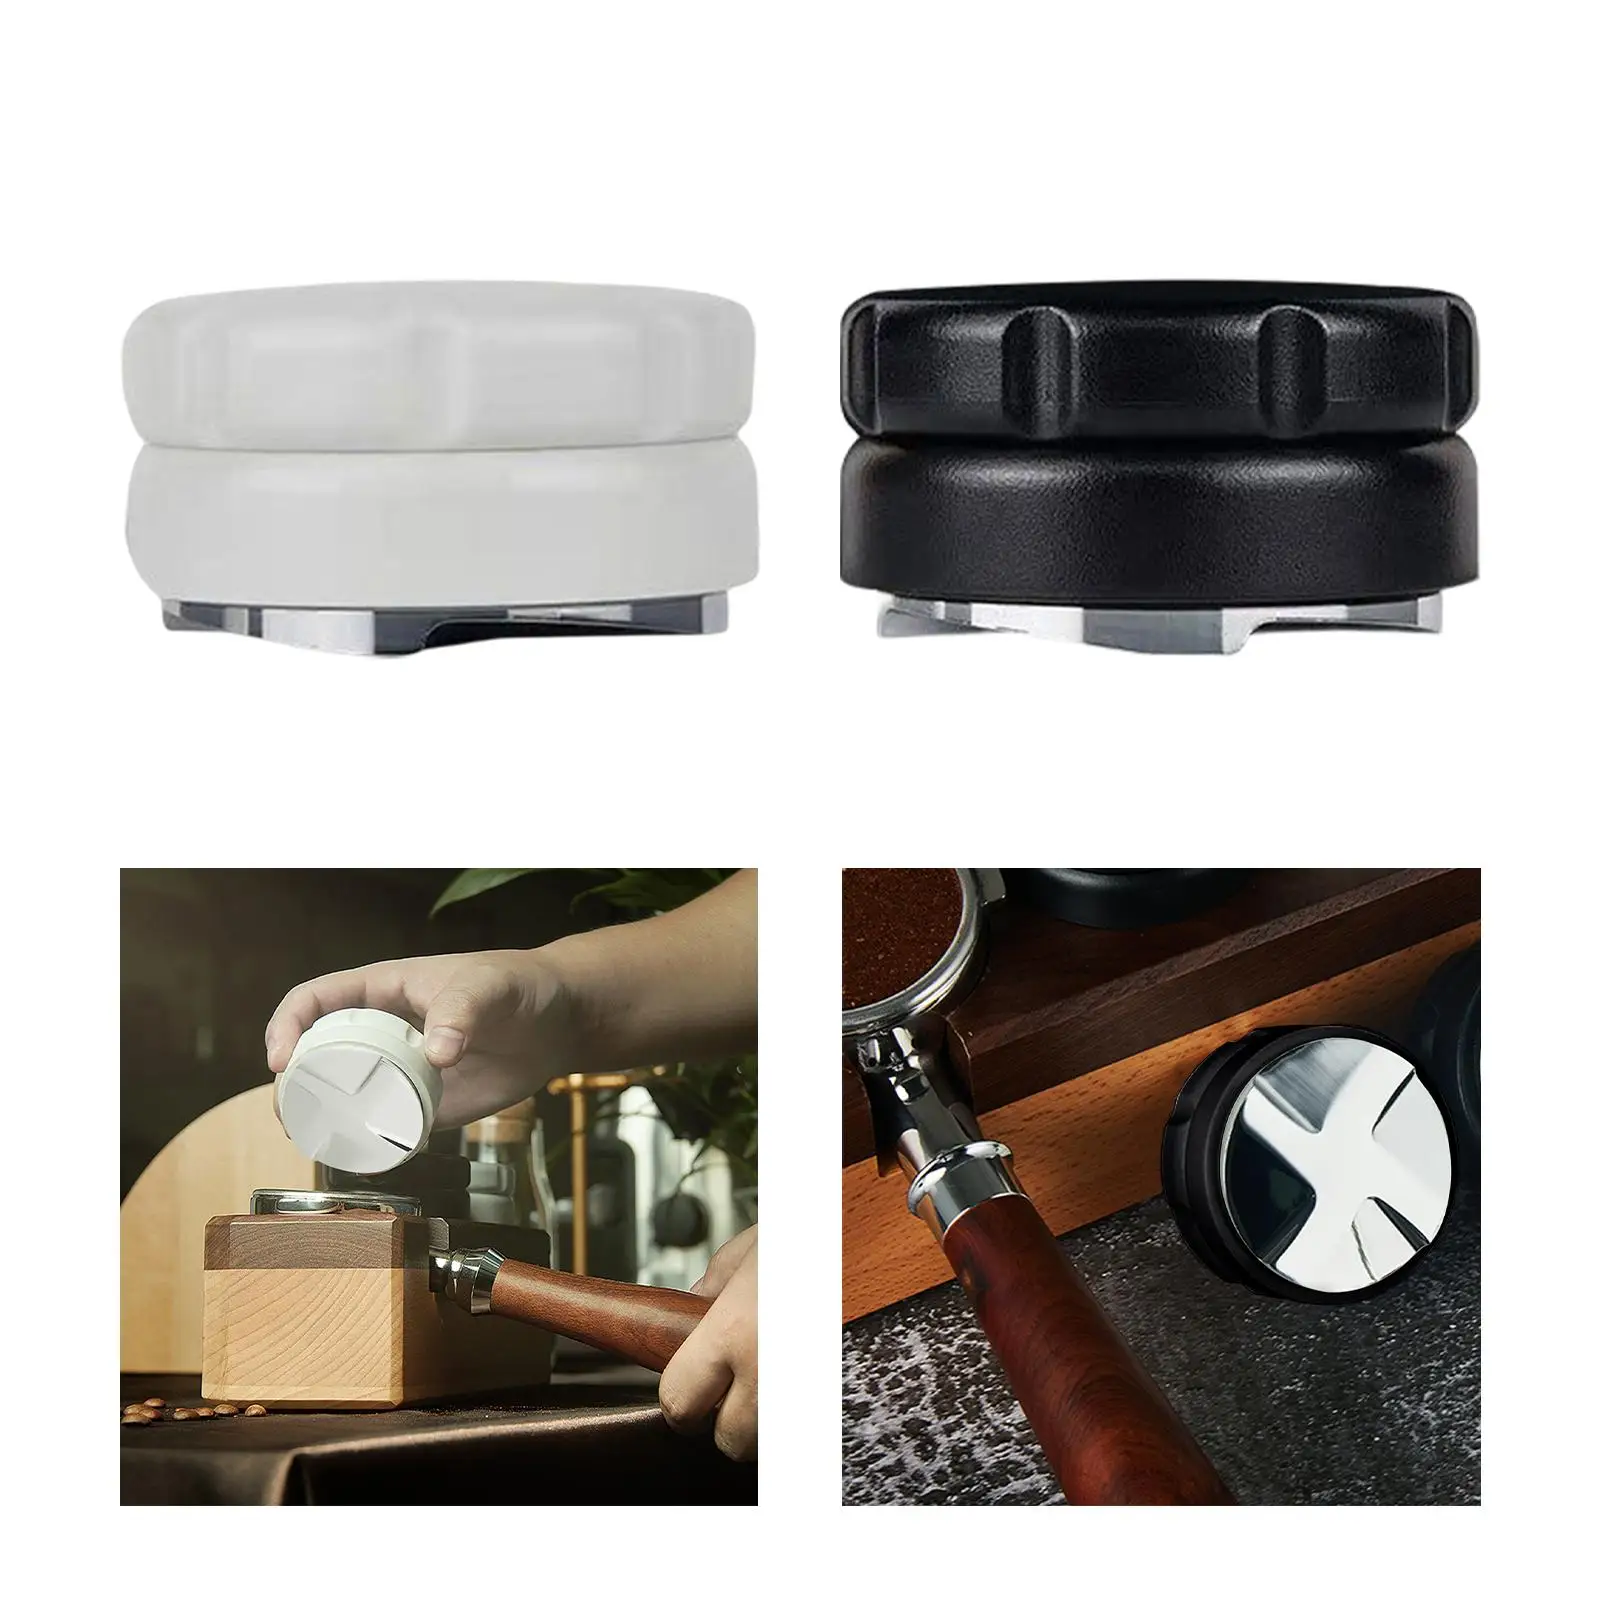 51mm Coffee Distributor, Adjustable Hand Tamper, Professional for Kitchen Working Household